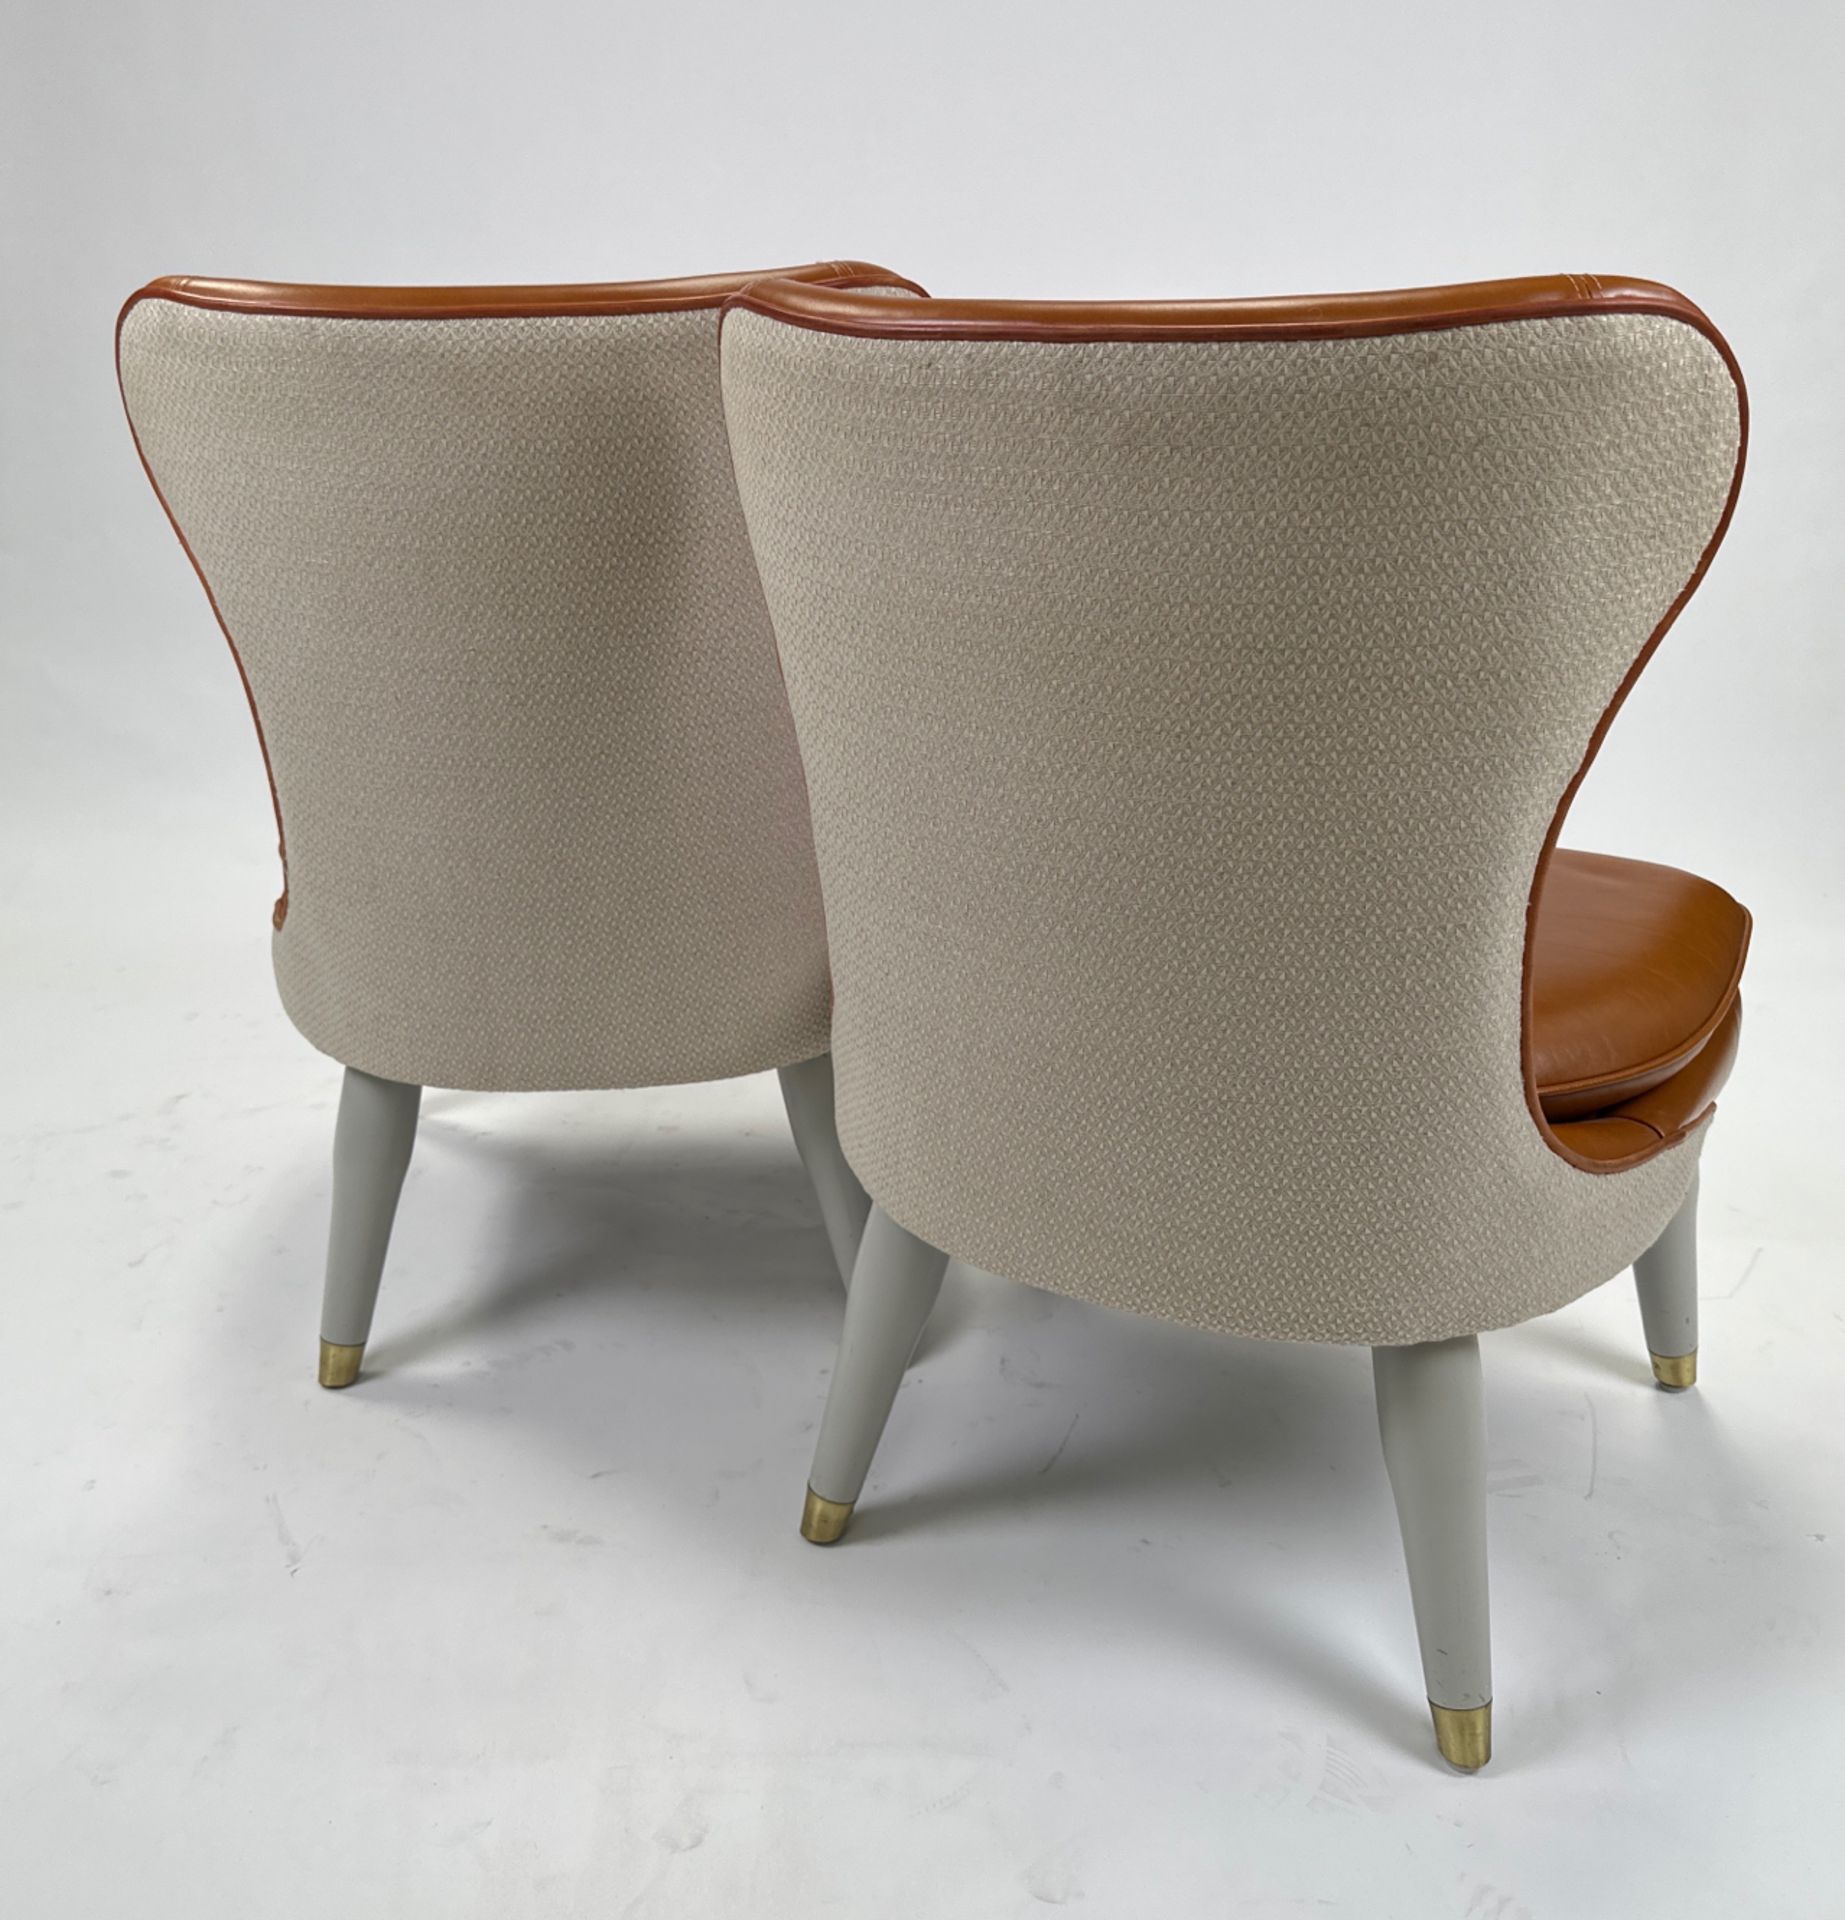 Pair of Ben Whistler Chairs Commissioned by Robert Angell Designed for The Berkeley - Image 2 of 5